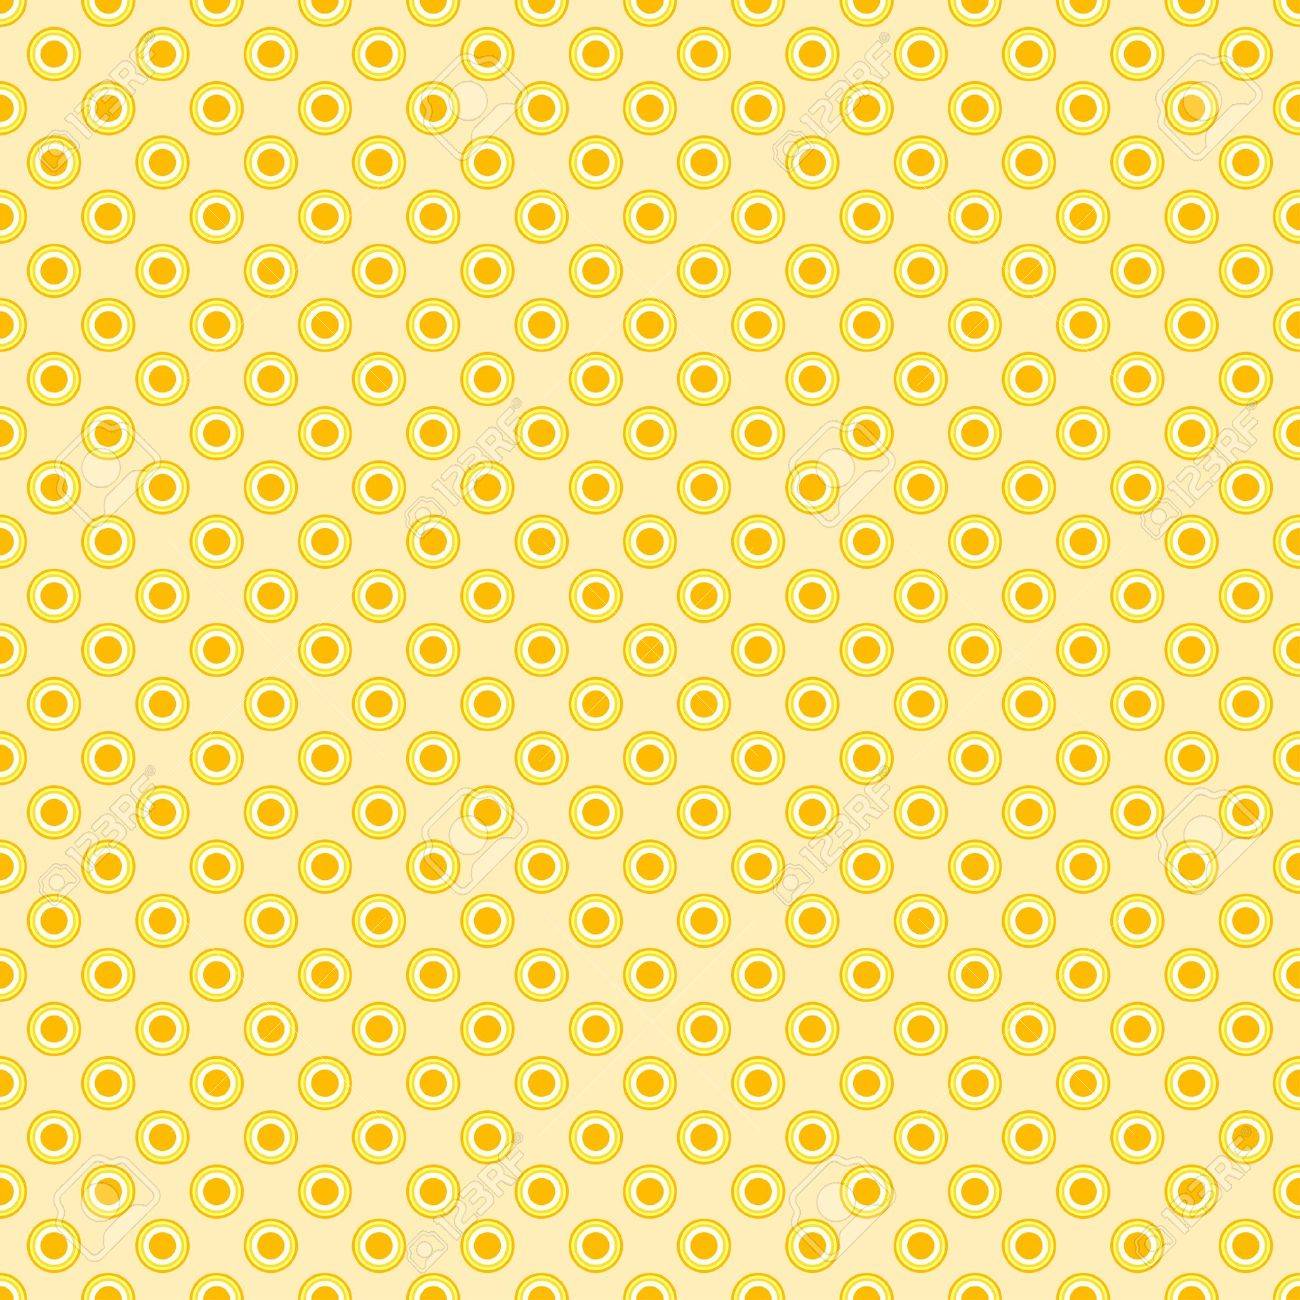 Seamless Polka Dot Pattern In Retro Style Can Be Used To Fabric